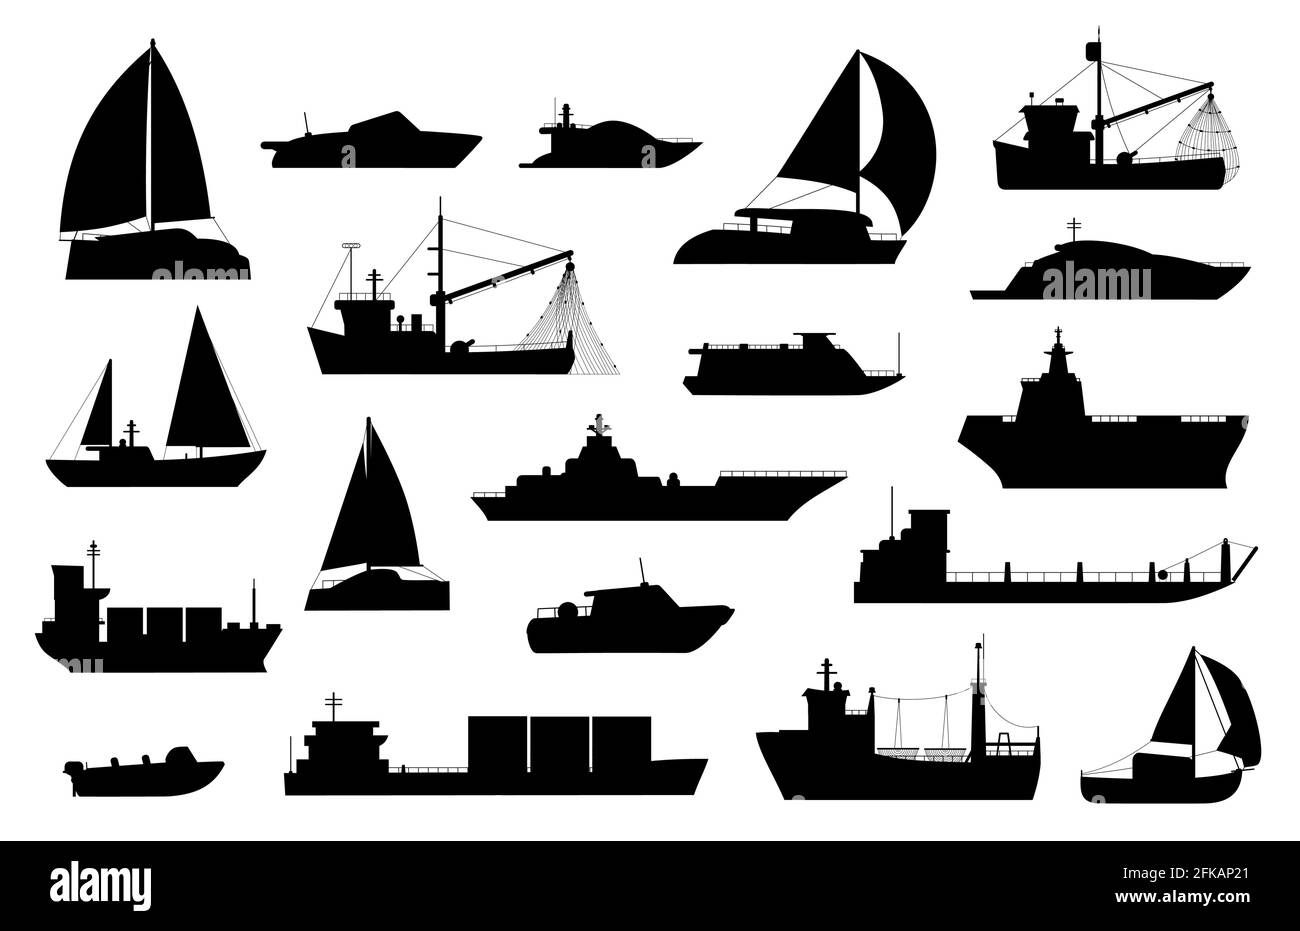 Boats silhouette. Sailboat, barge, fishing and cruise ship, sea yacht, passenger and cargo vessel icons. Nautical transport logo vector set Stock Vector